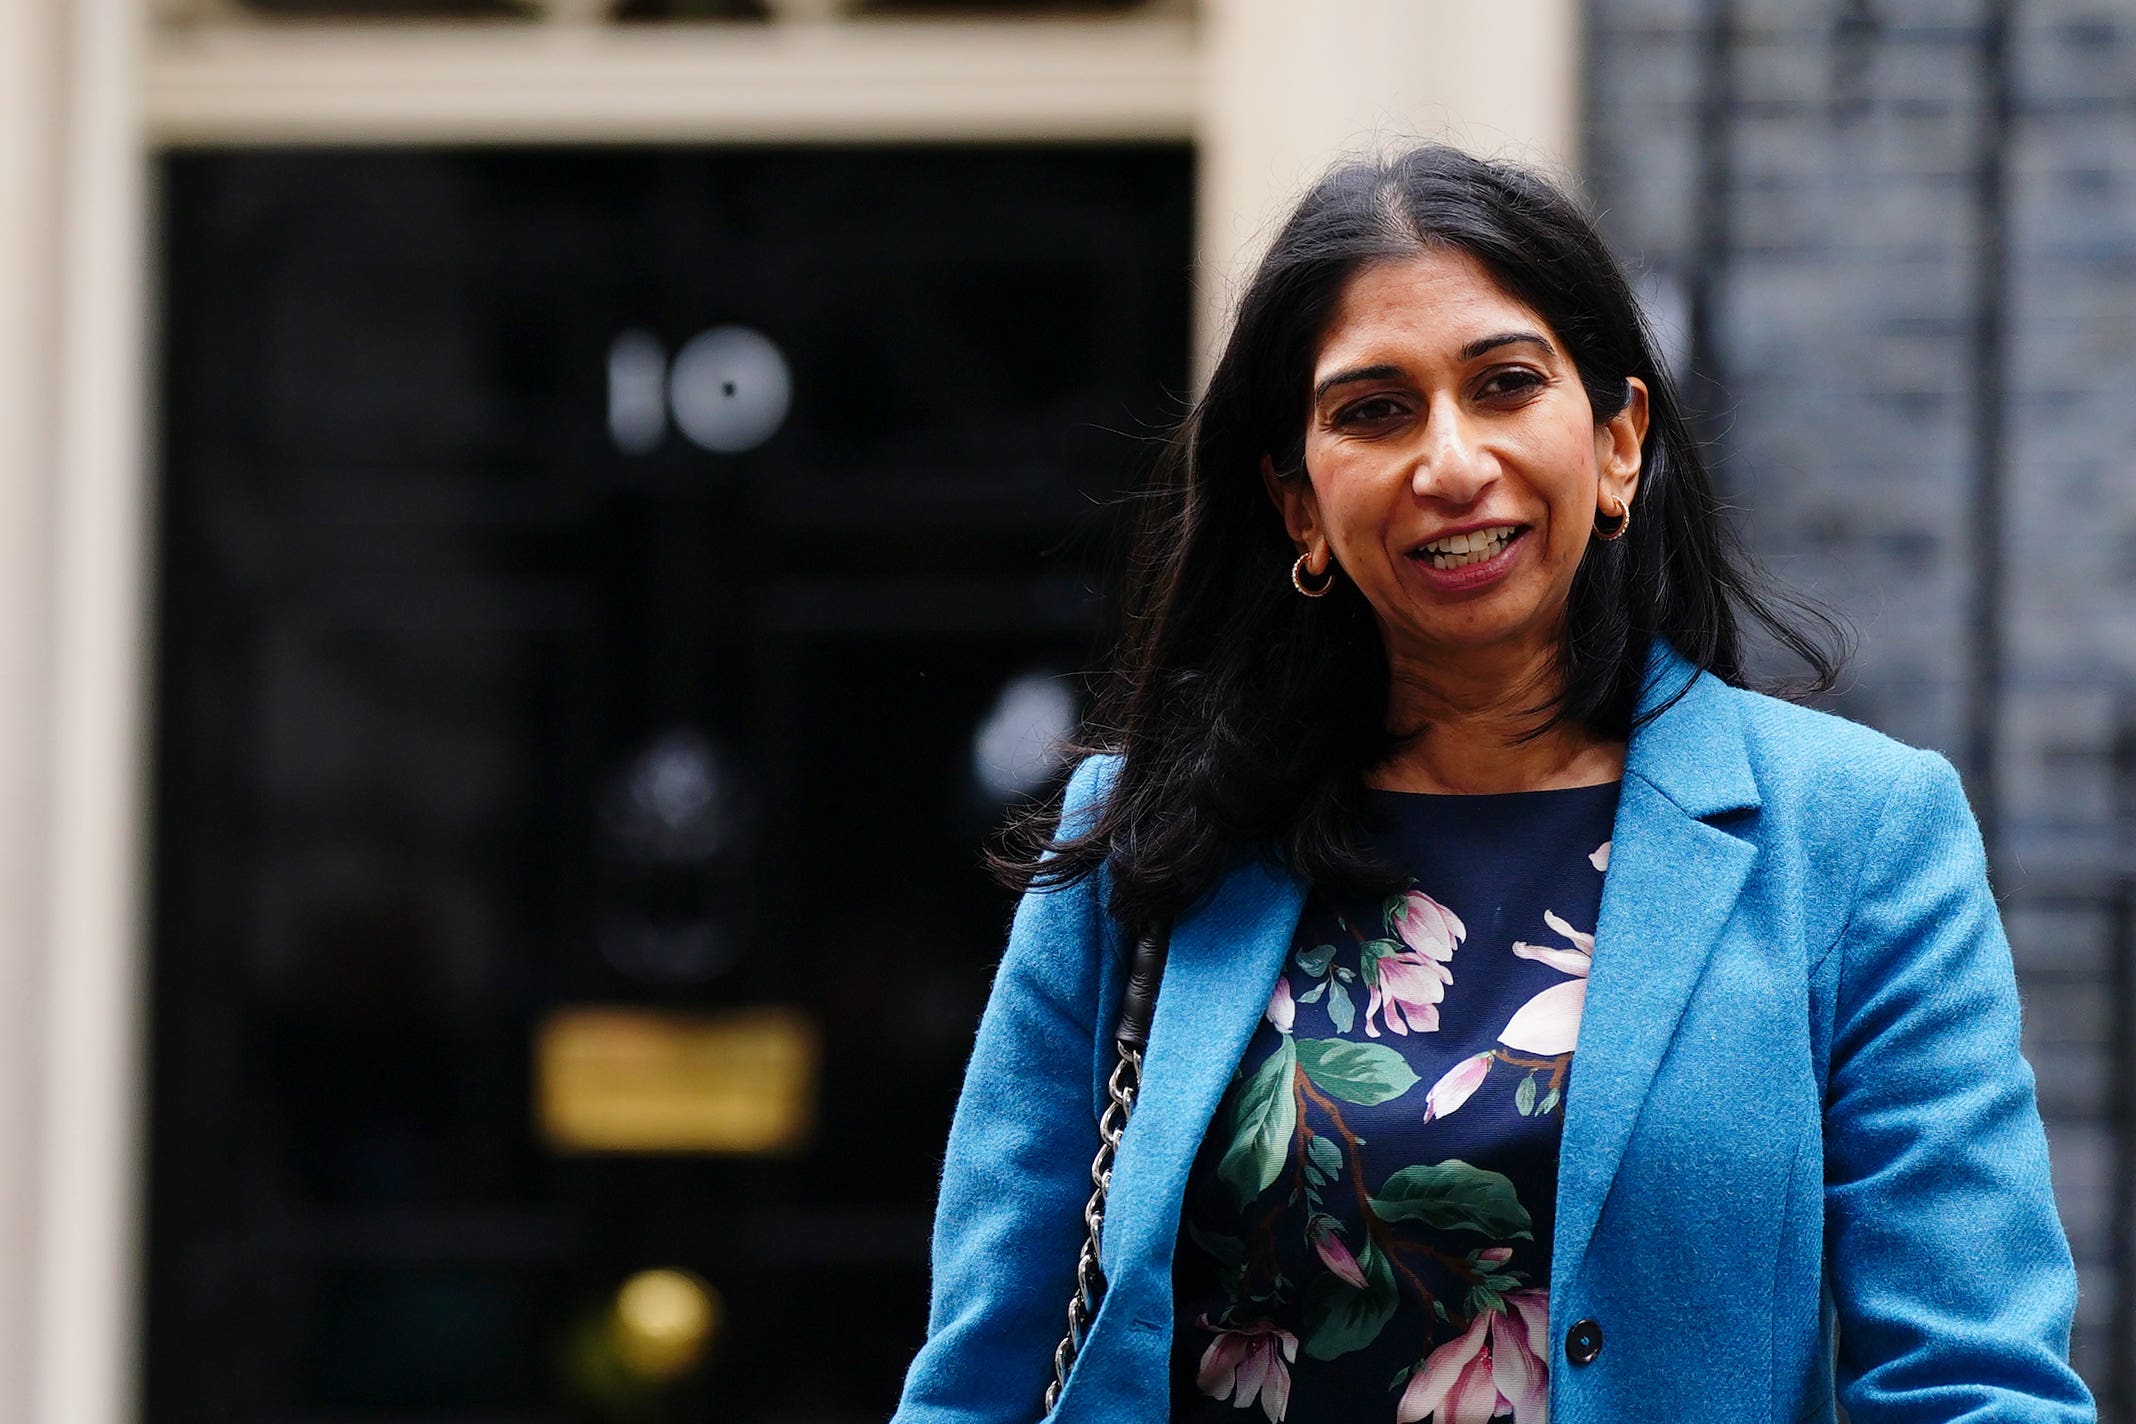 Home secretary Suella Braverman remains under pressure amid questions about her handling of the Manston migrant centre and her previous breach of the ministerial code